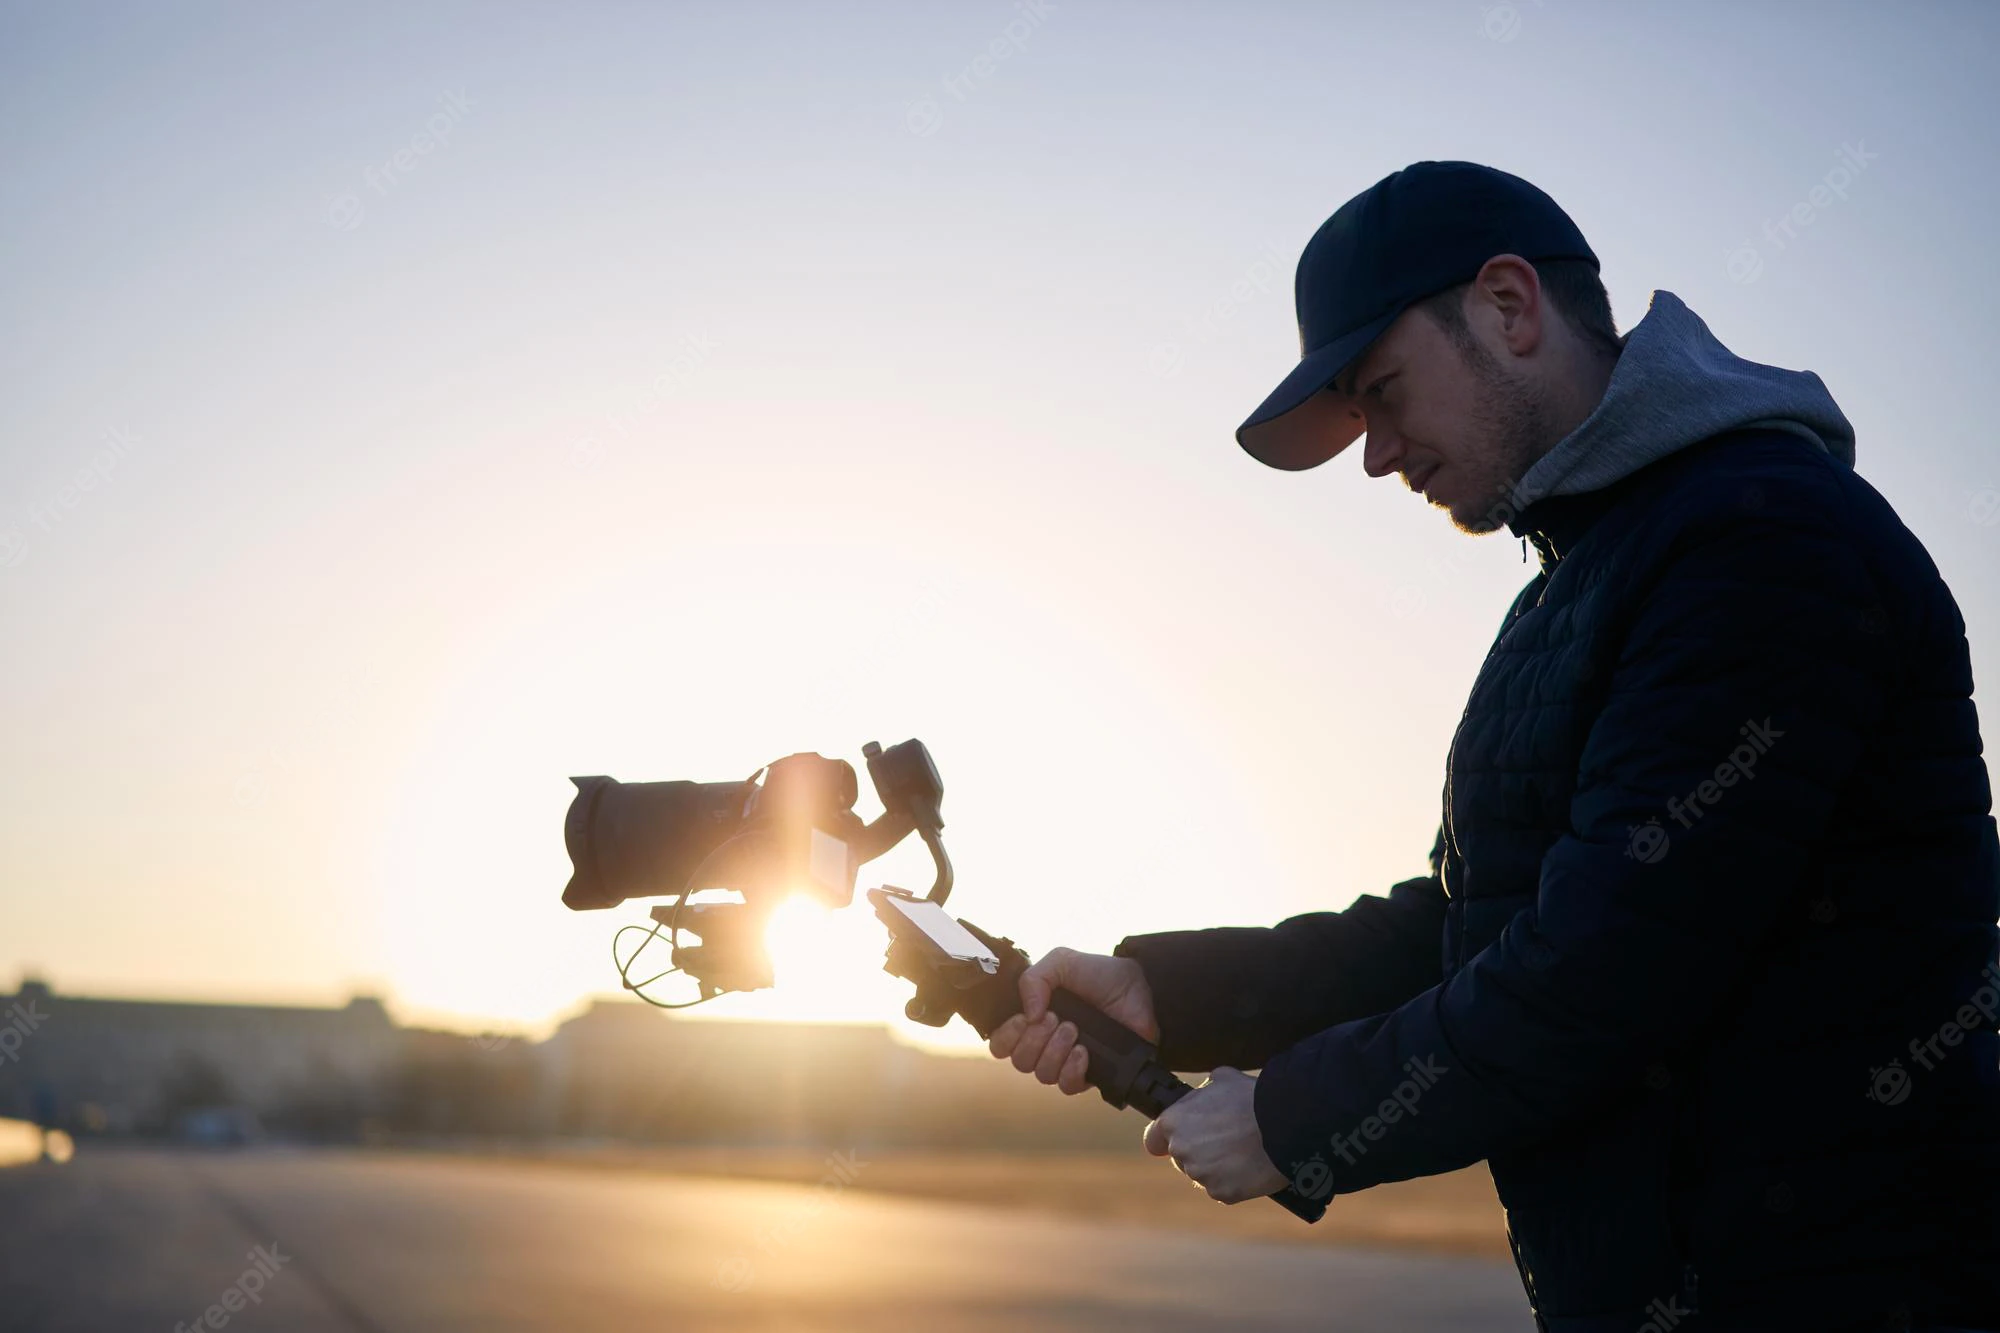 man filming with camera gimbal against city sunrise 697241 662